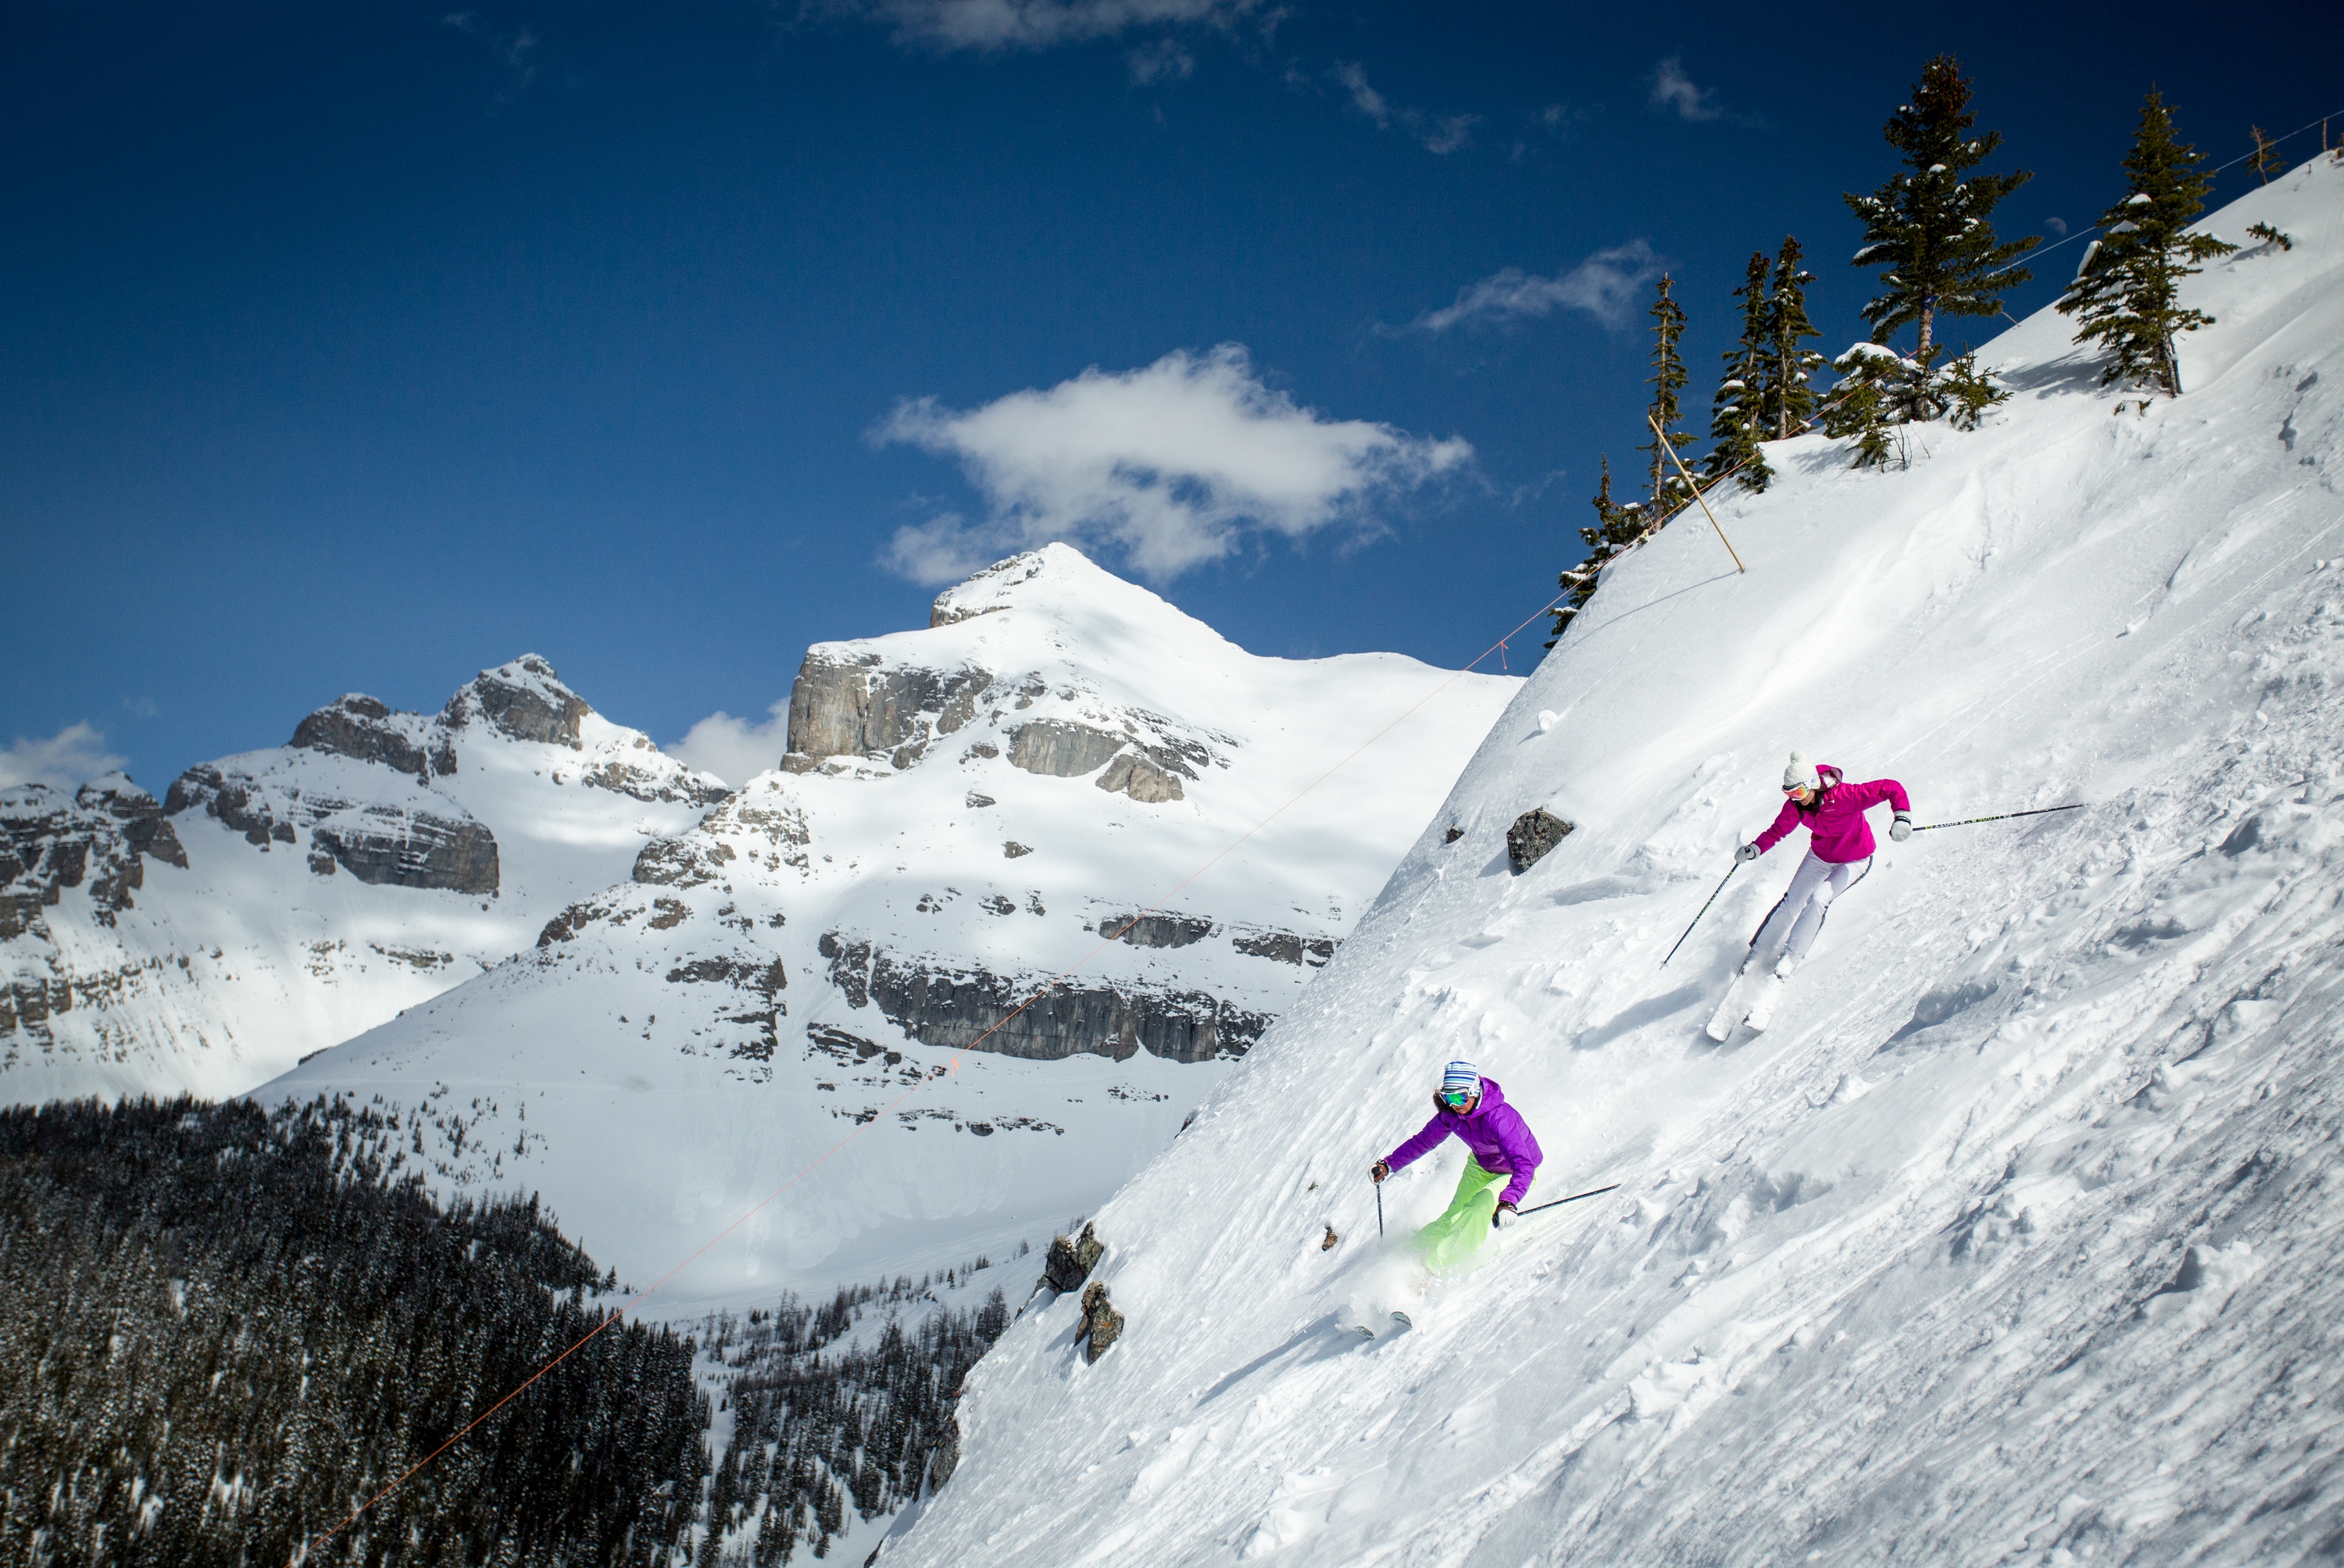 What’s New in BanffLake Louise This Winter First Tracks!! Online Ski